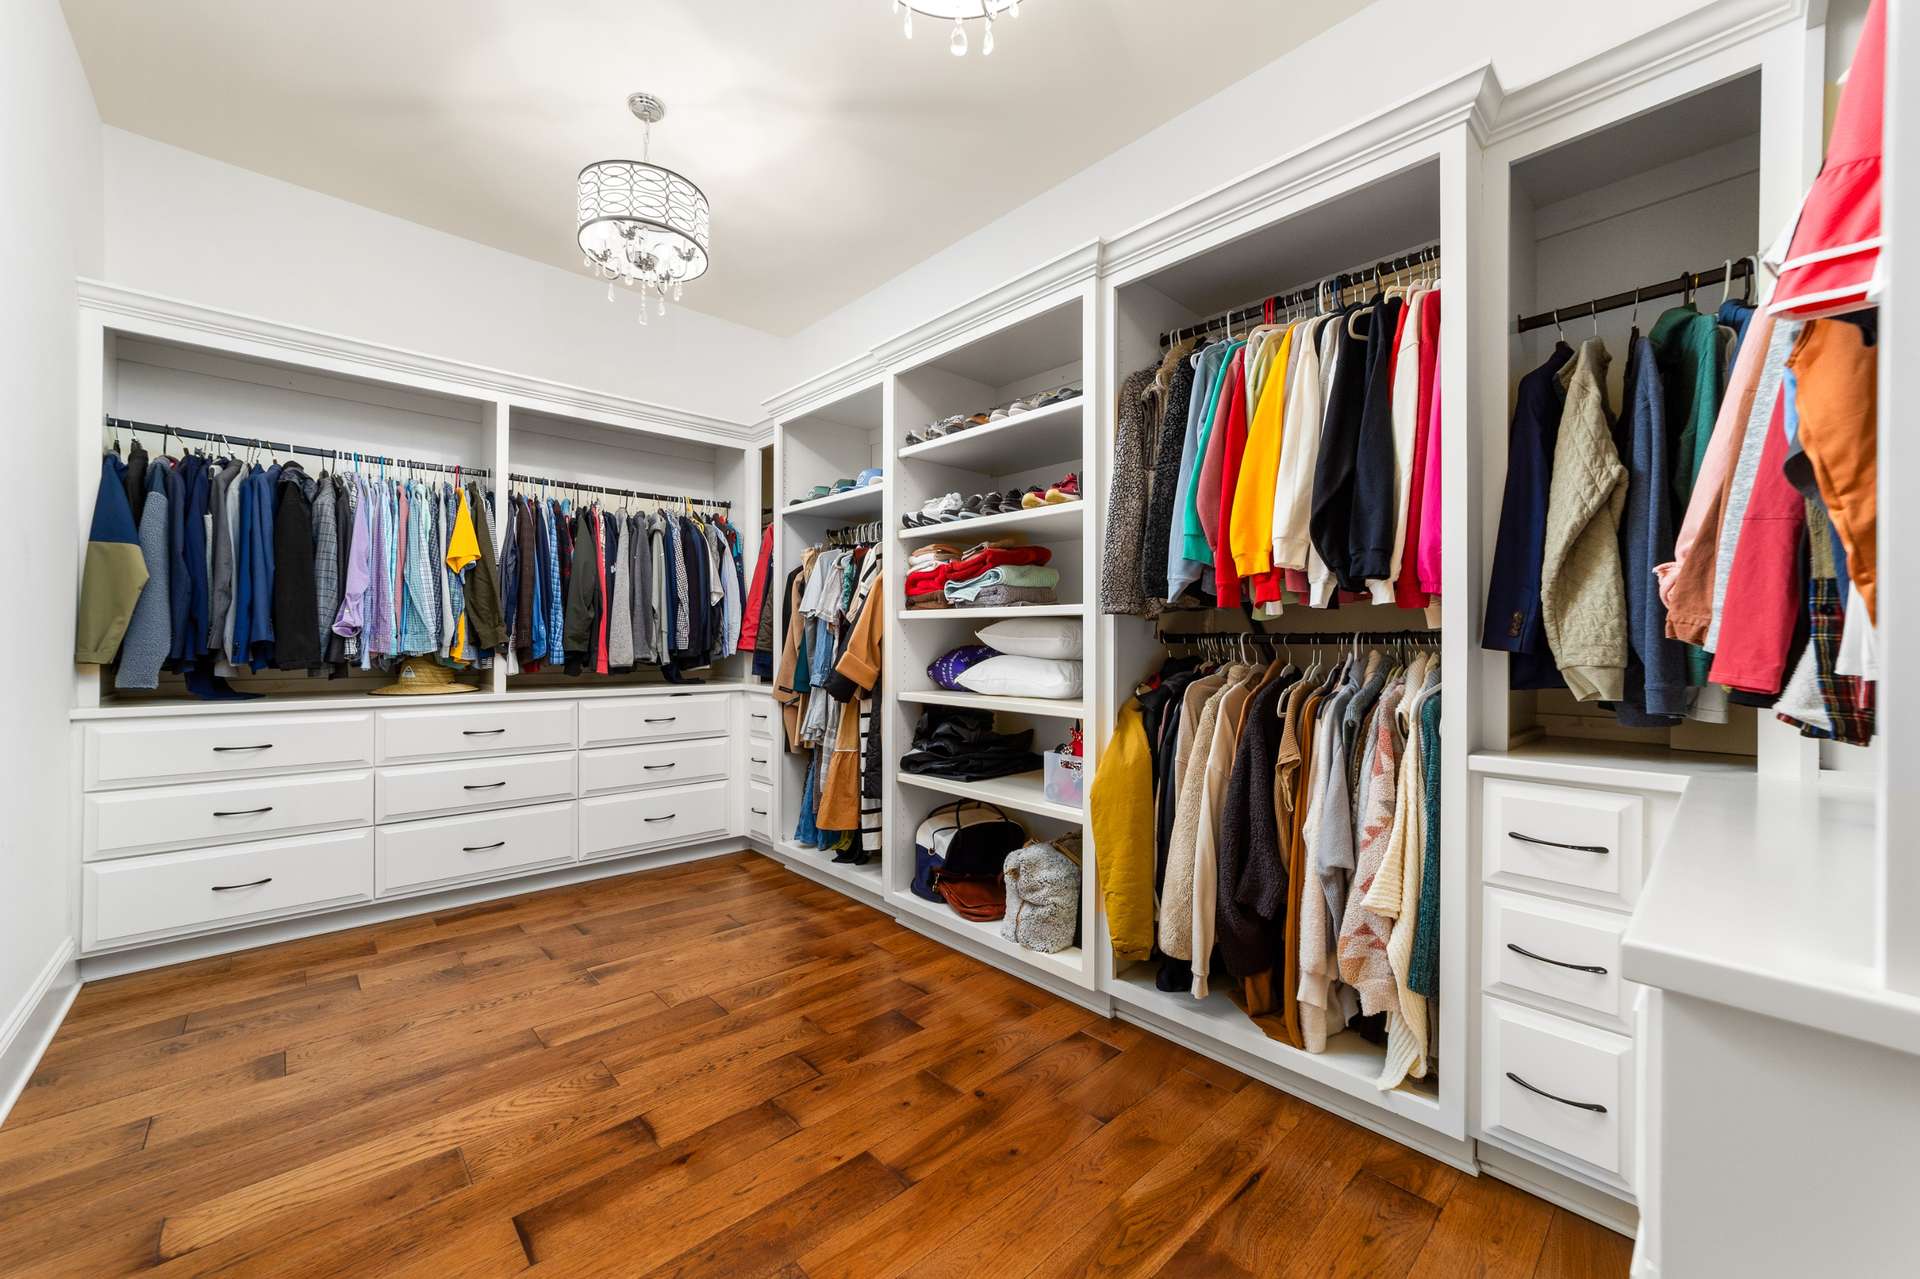 33 of 79. Interior Photo - 846 Armstrong Rd - Additional Photo of Primary Closet showcasing extensive custom closet cabinetry and organization.